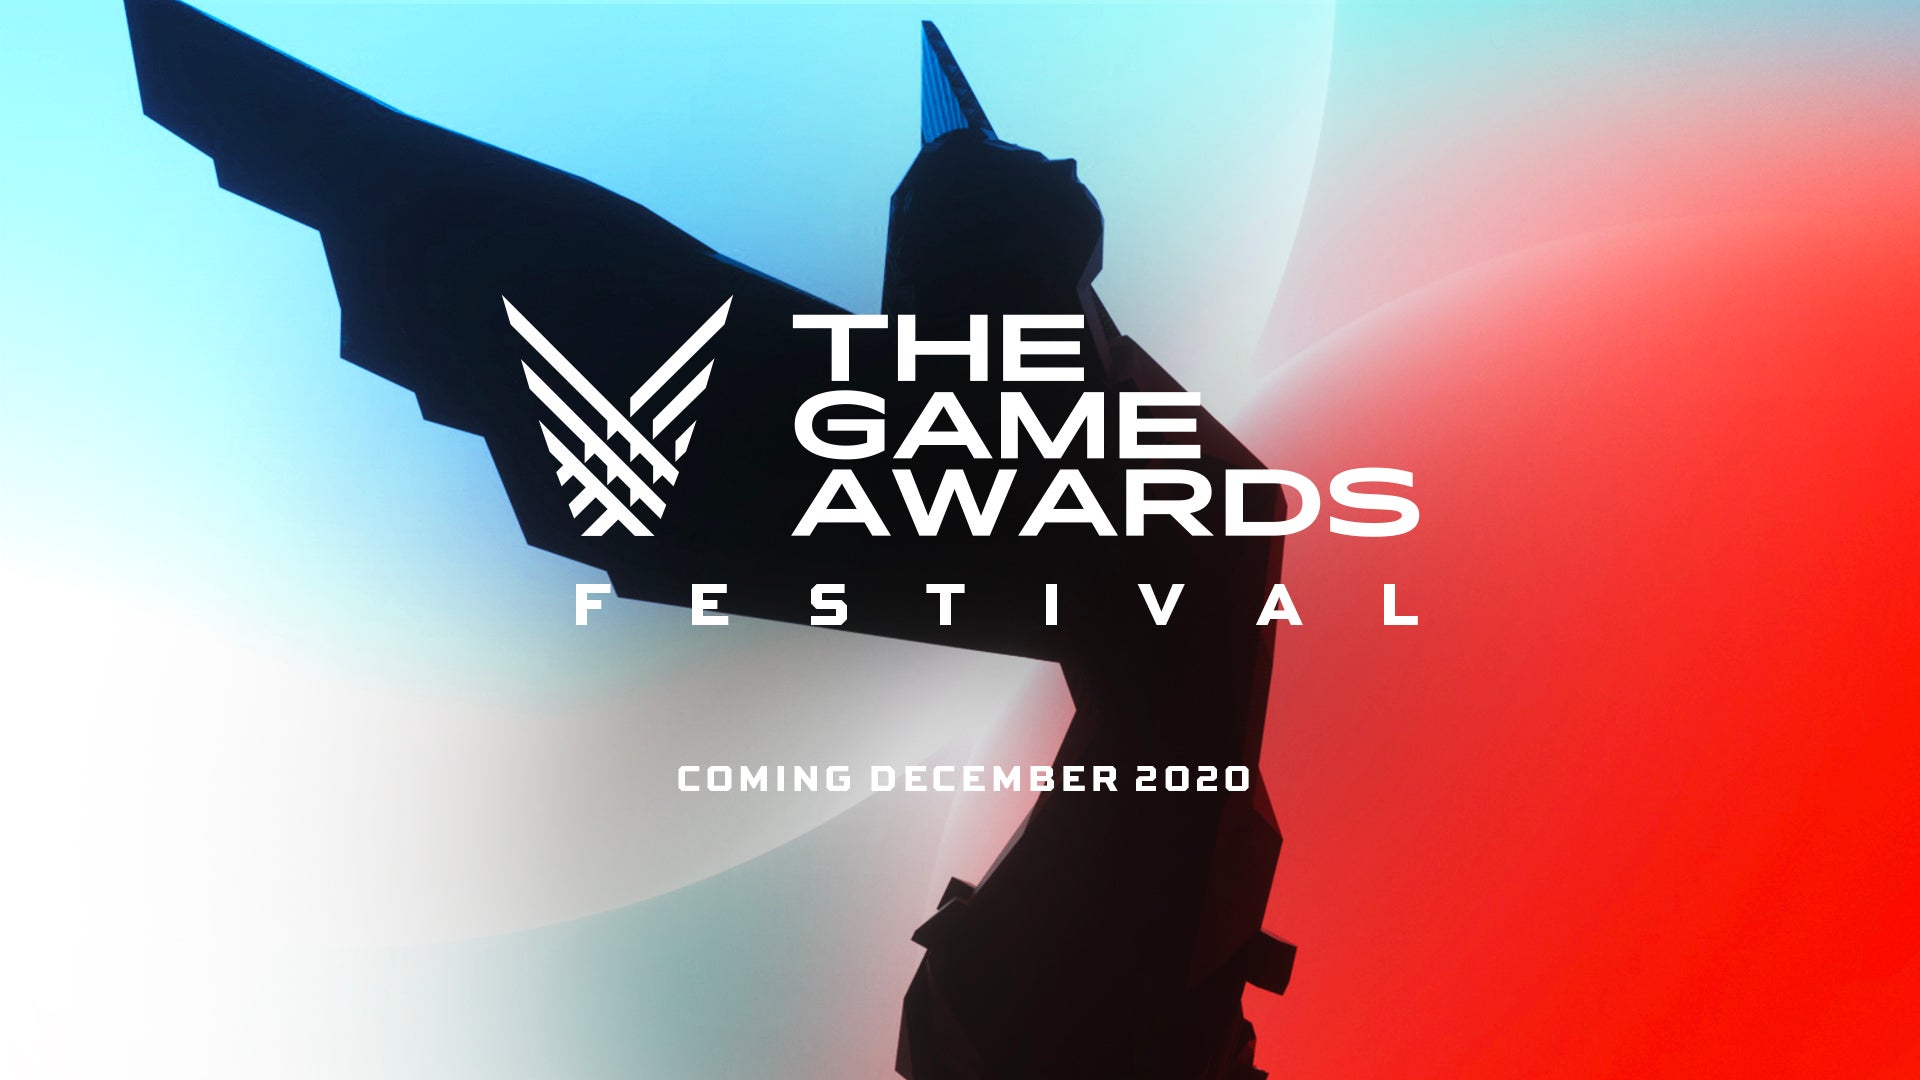 Image for The Game Awards Festival will provide playable demos next week